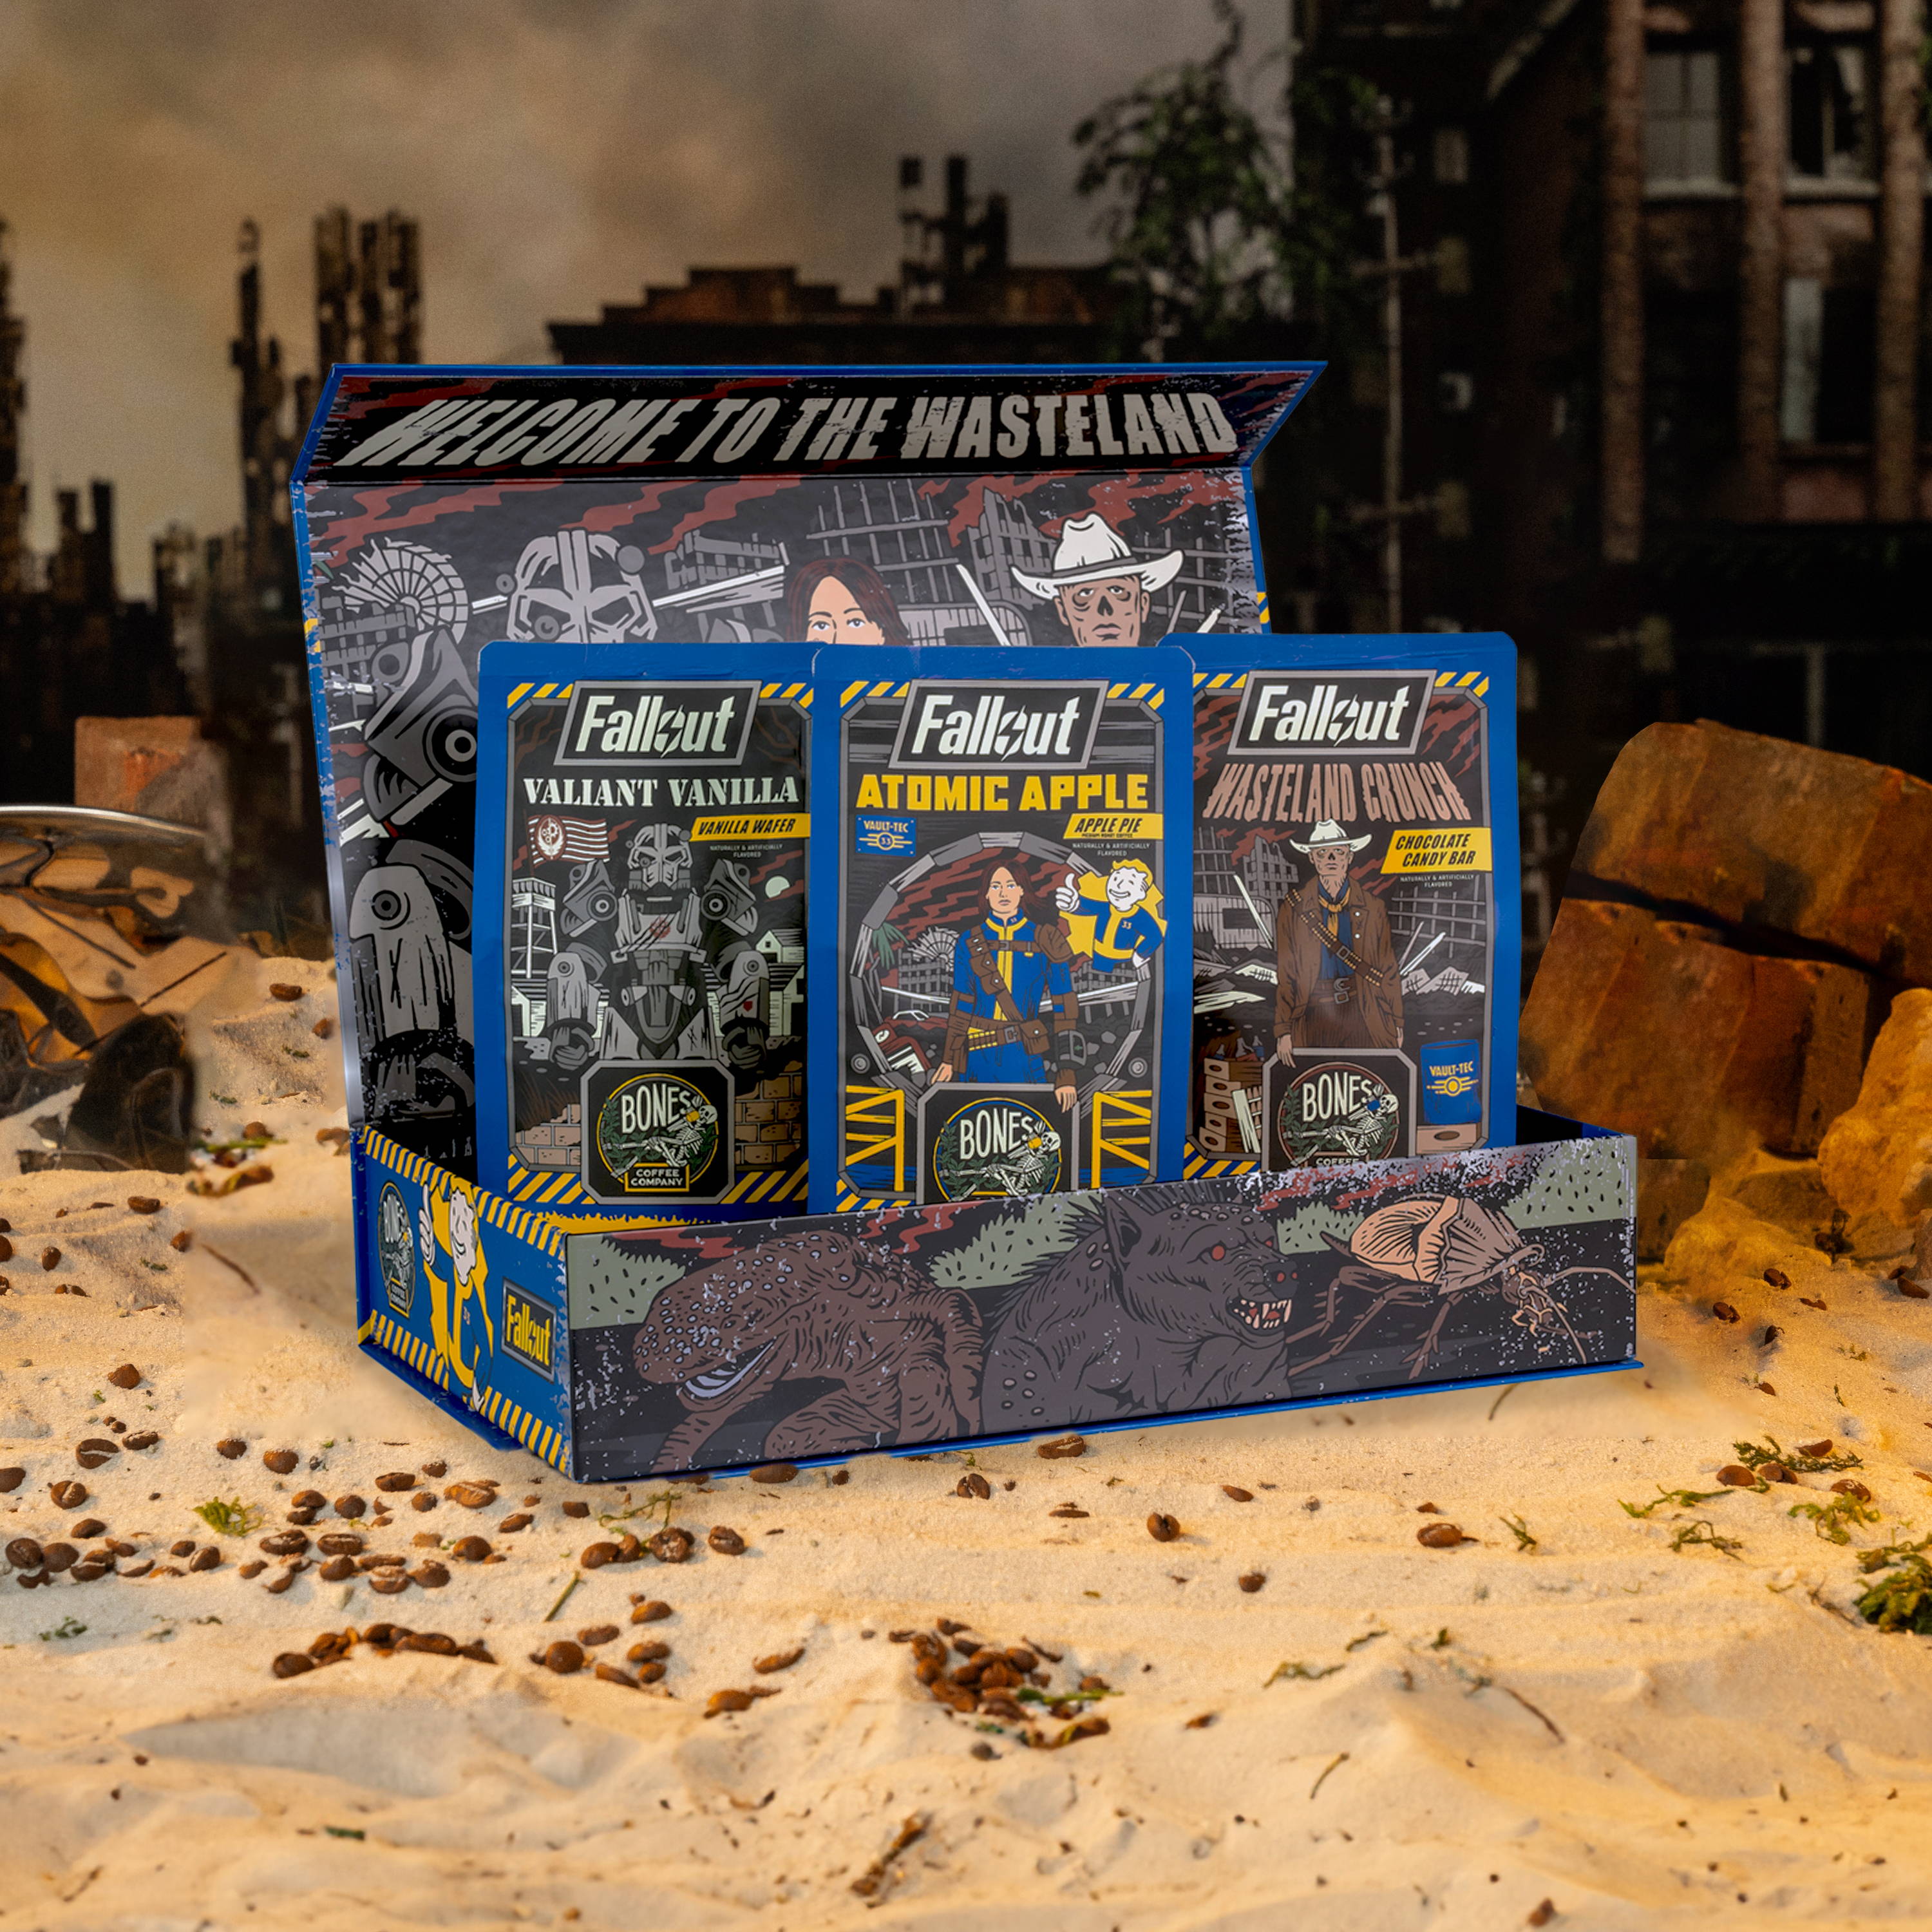 The Fallout Collector's box sits on some sand near broken bricks. Inside the box are three 12 ounce bags of coffee named Valiant Vanilla, Atomic Apple, and Wasteland Crunch.